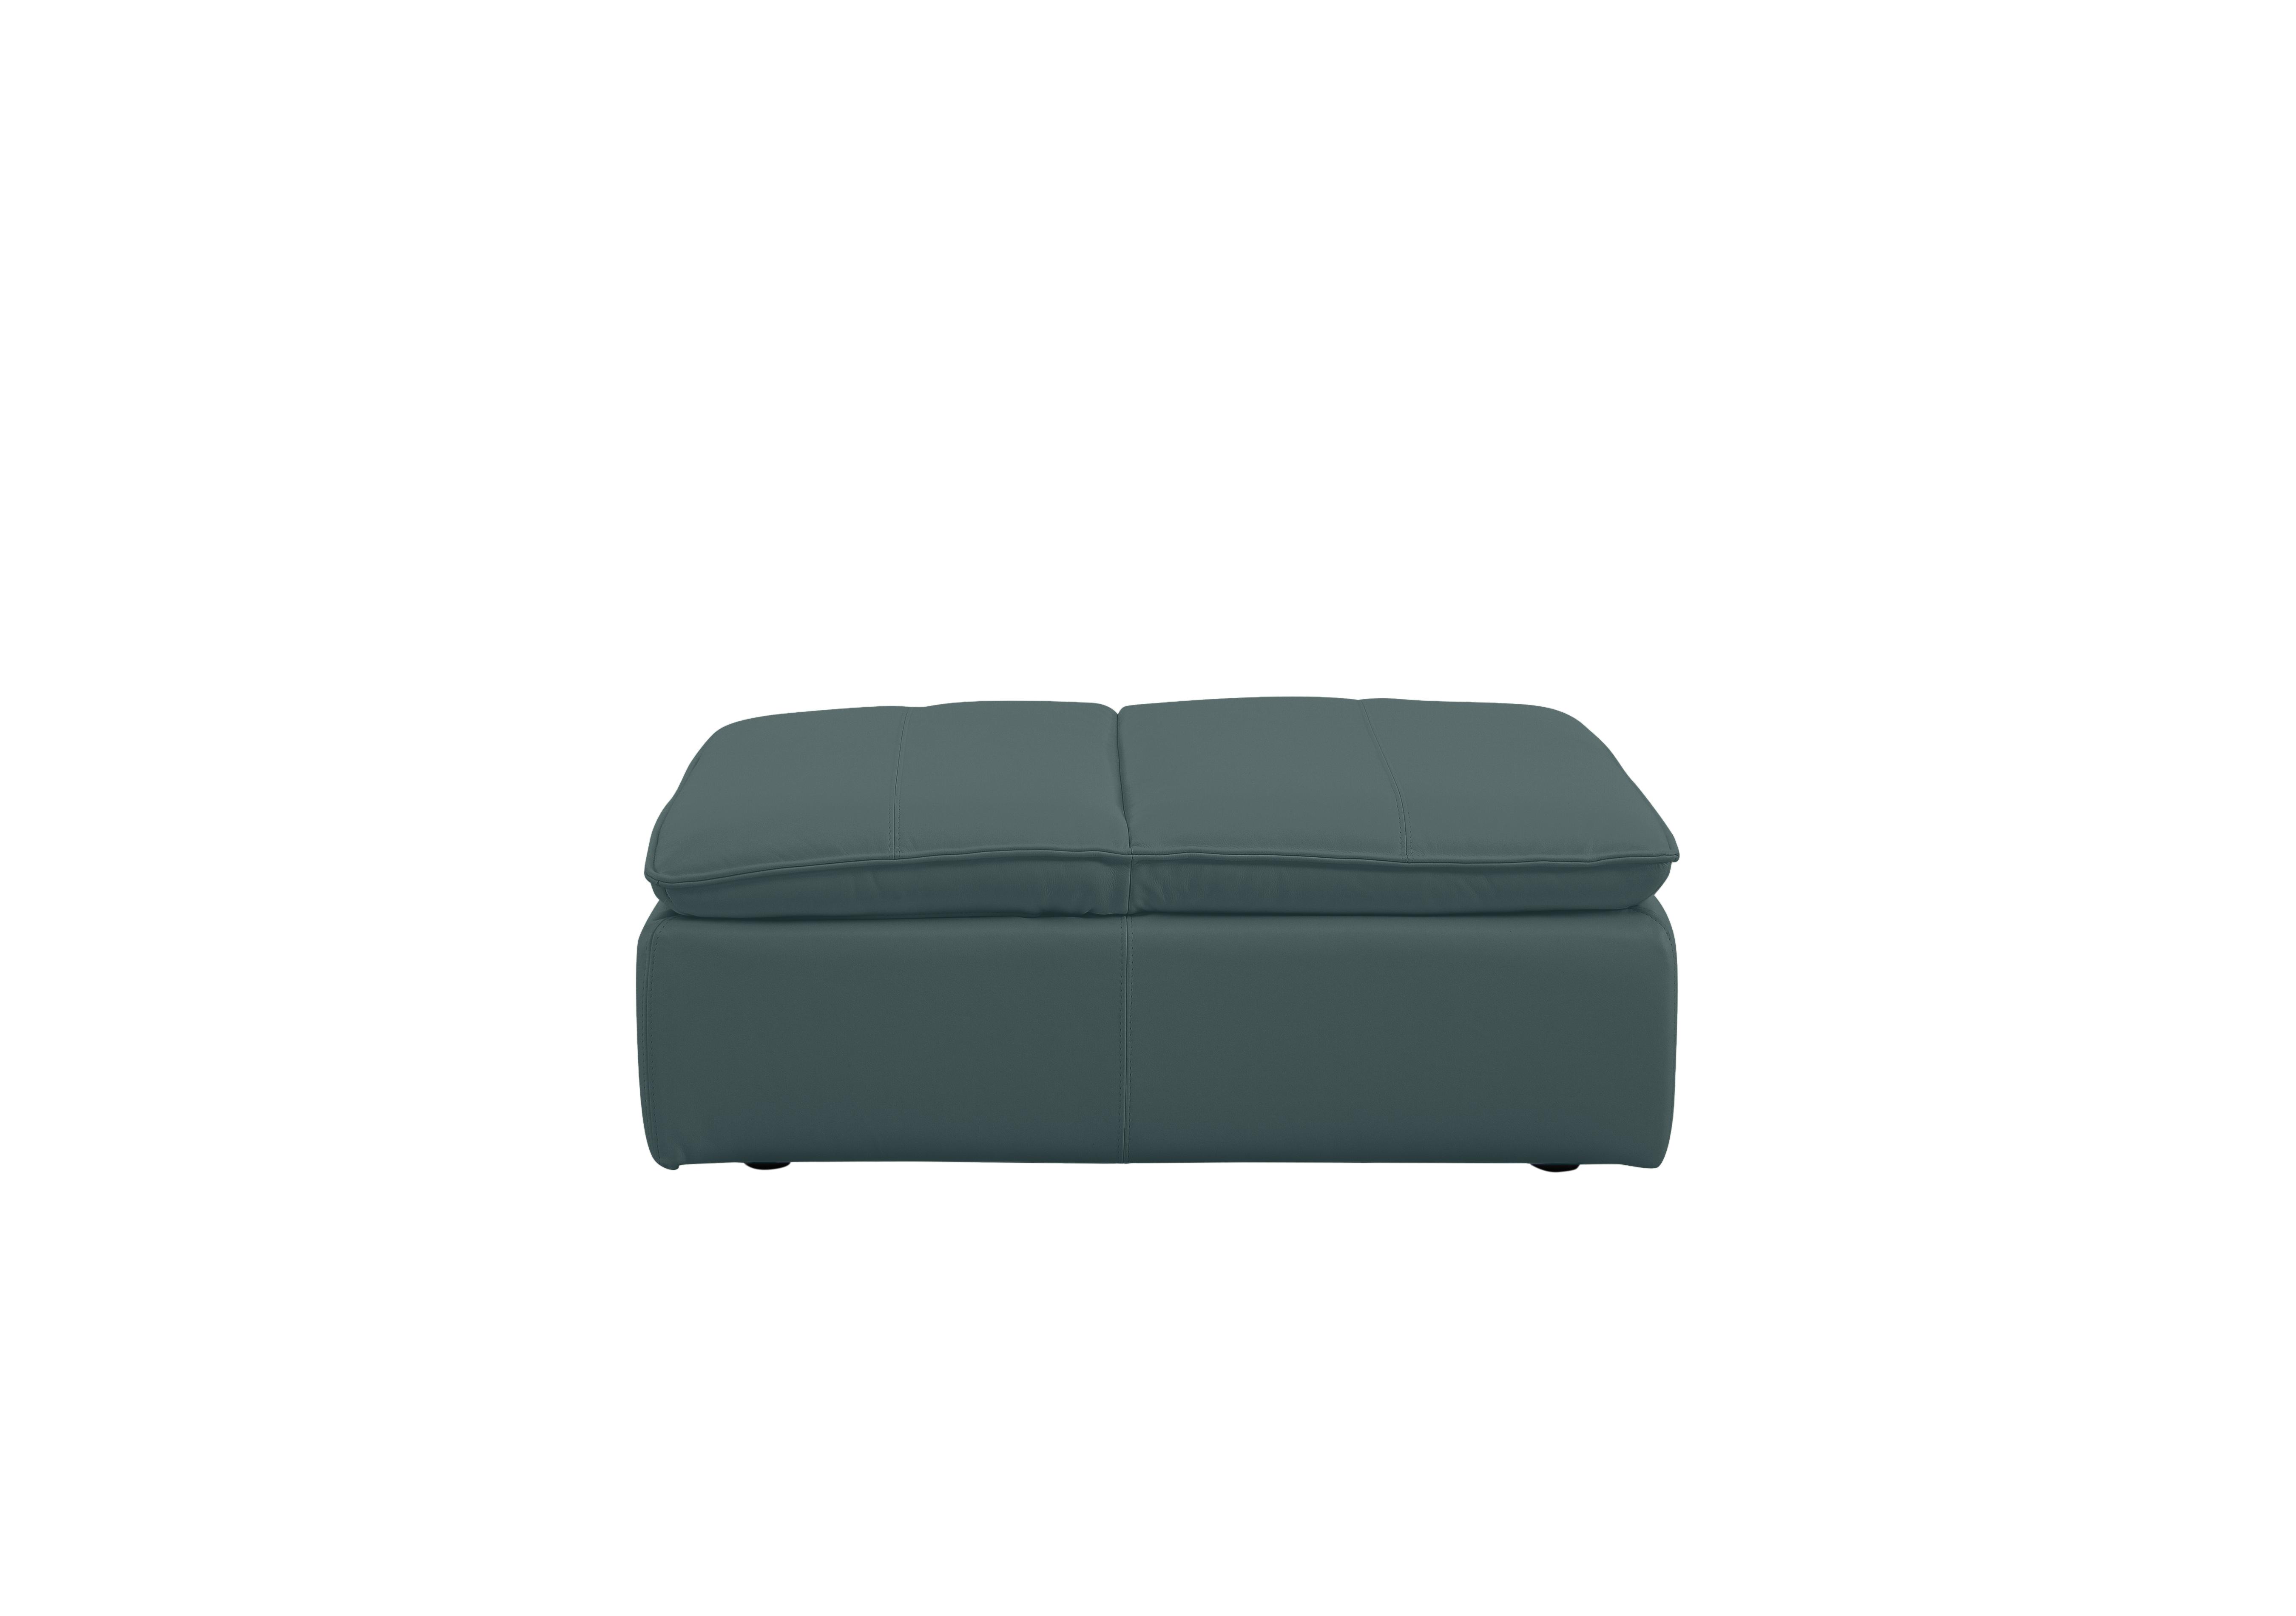 Starlight Express Leather Storage Chair Footstool in Bv-301e Lake Green on Furniture Village